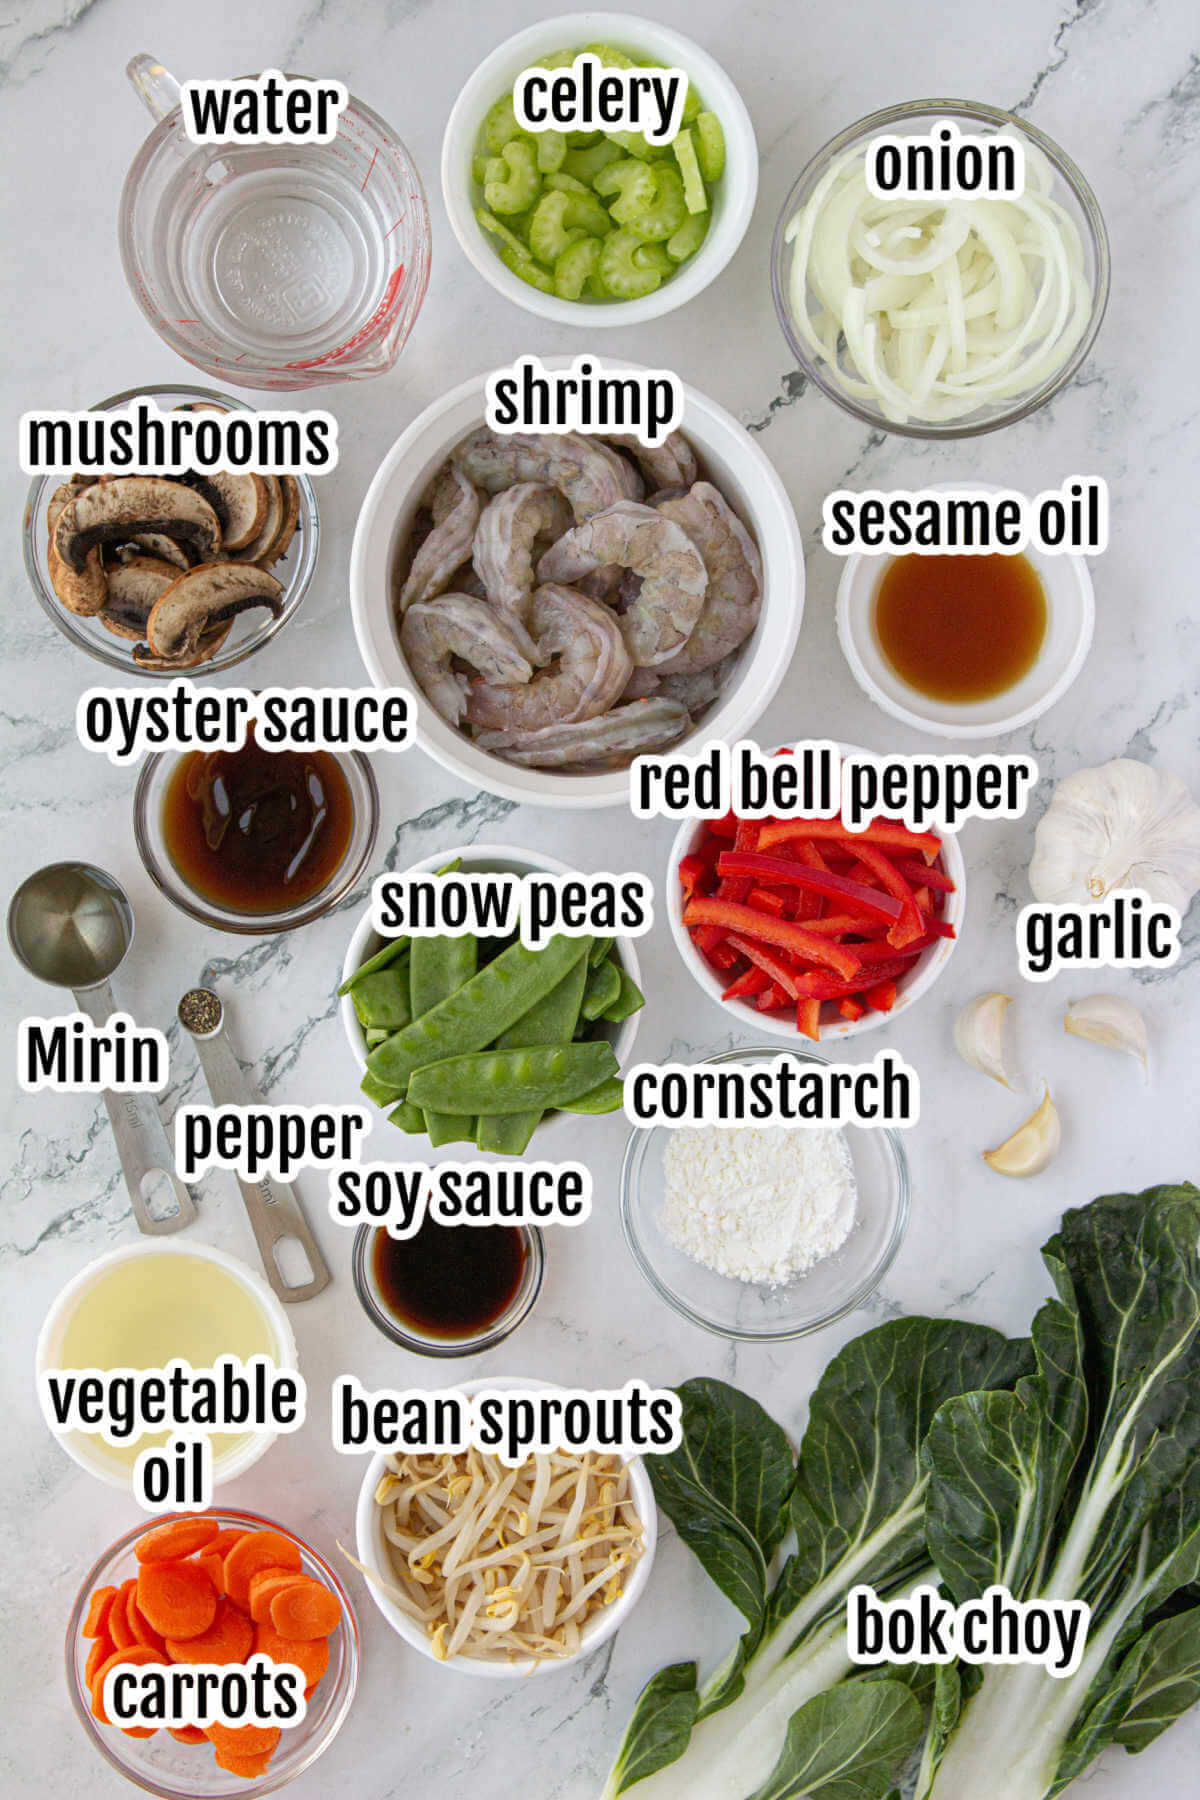 Image of the ingredients needed to make Chop Suey wit Shrimp and the traditional Asian Chop Suey sauce. 